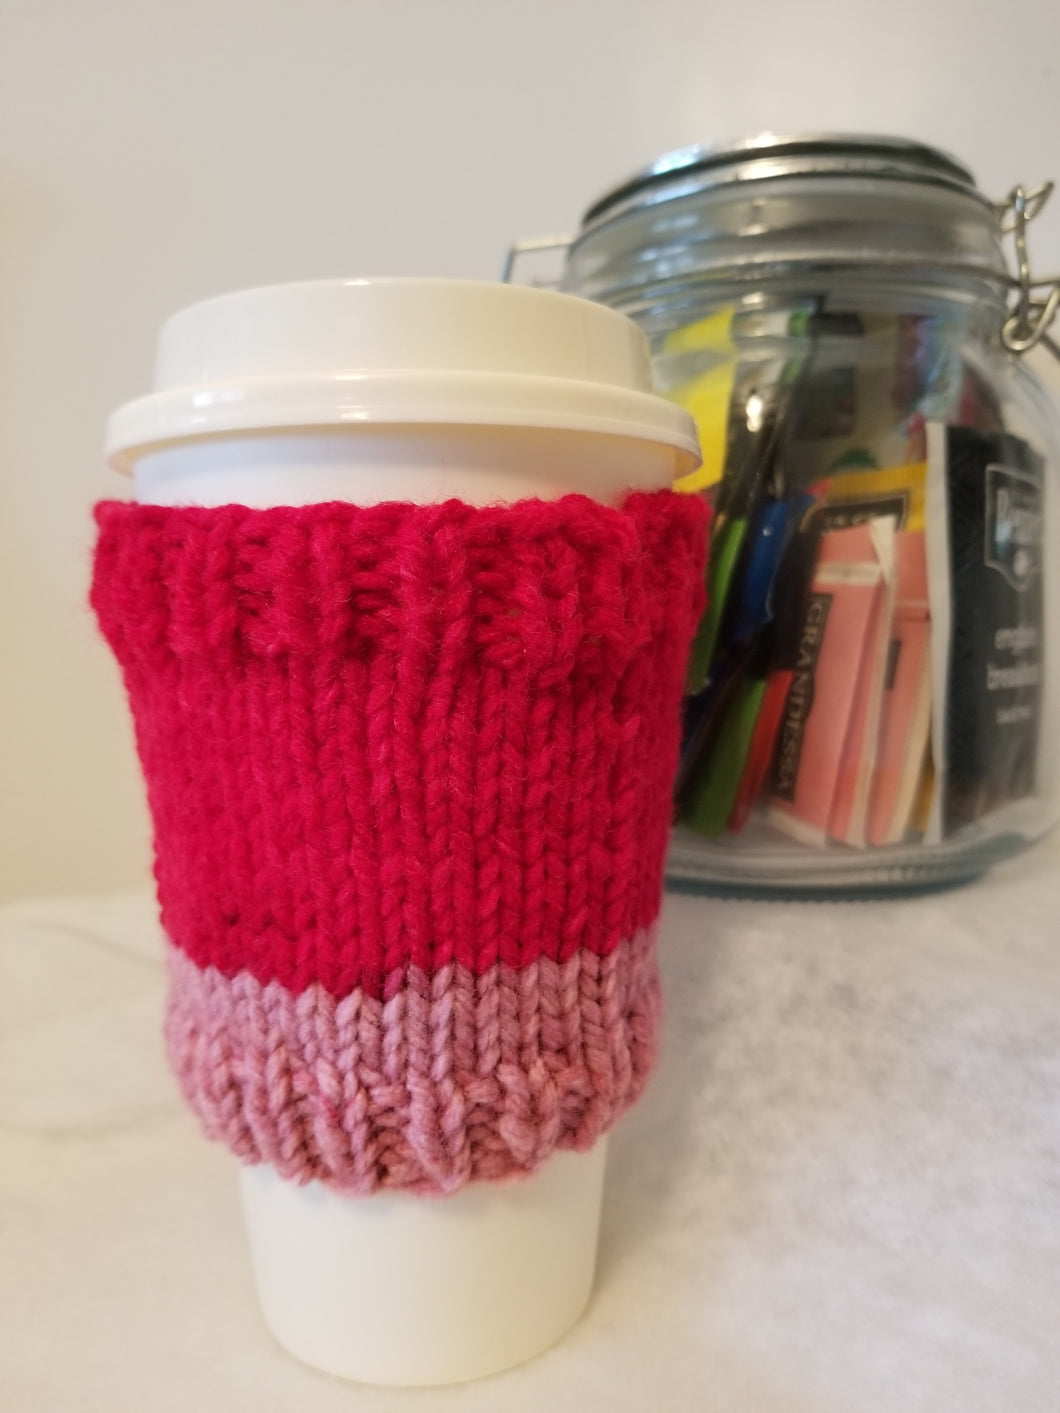 Cup Cuddlers fit 12, 16, 20, & 24 oz cups from your favorite shop, as well as reusable cups. They replace the disposable cardboard sleeve on hot beverages and keep your hands free from moisture and stickiness on cold beverages. Cup Cuddlers are $5 each